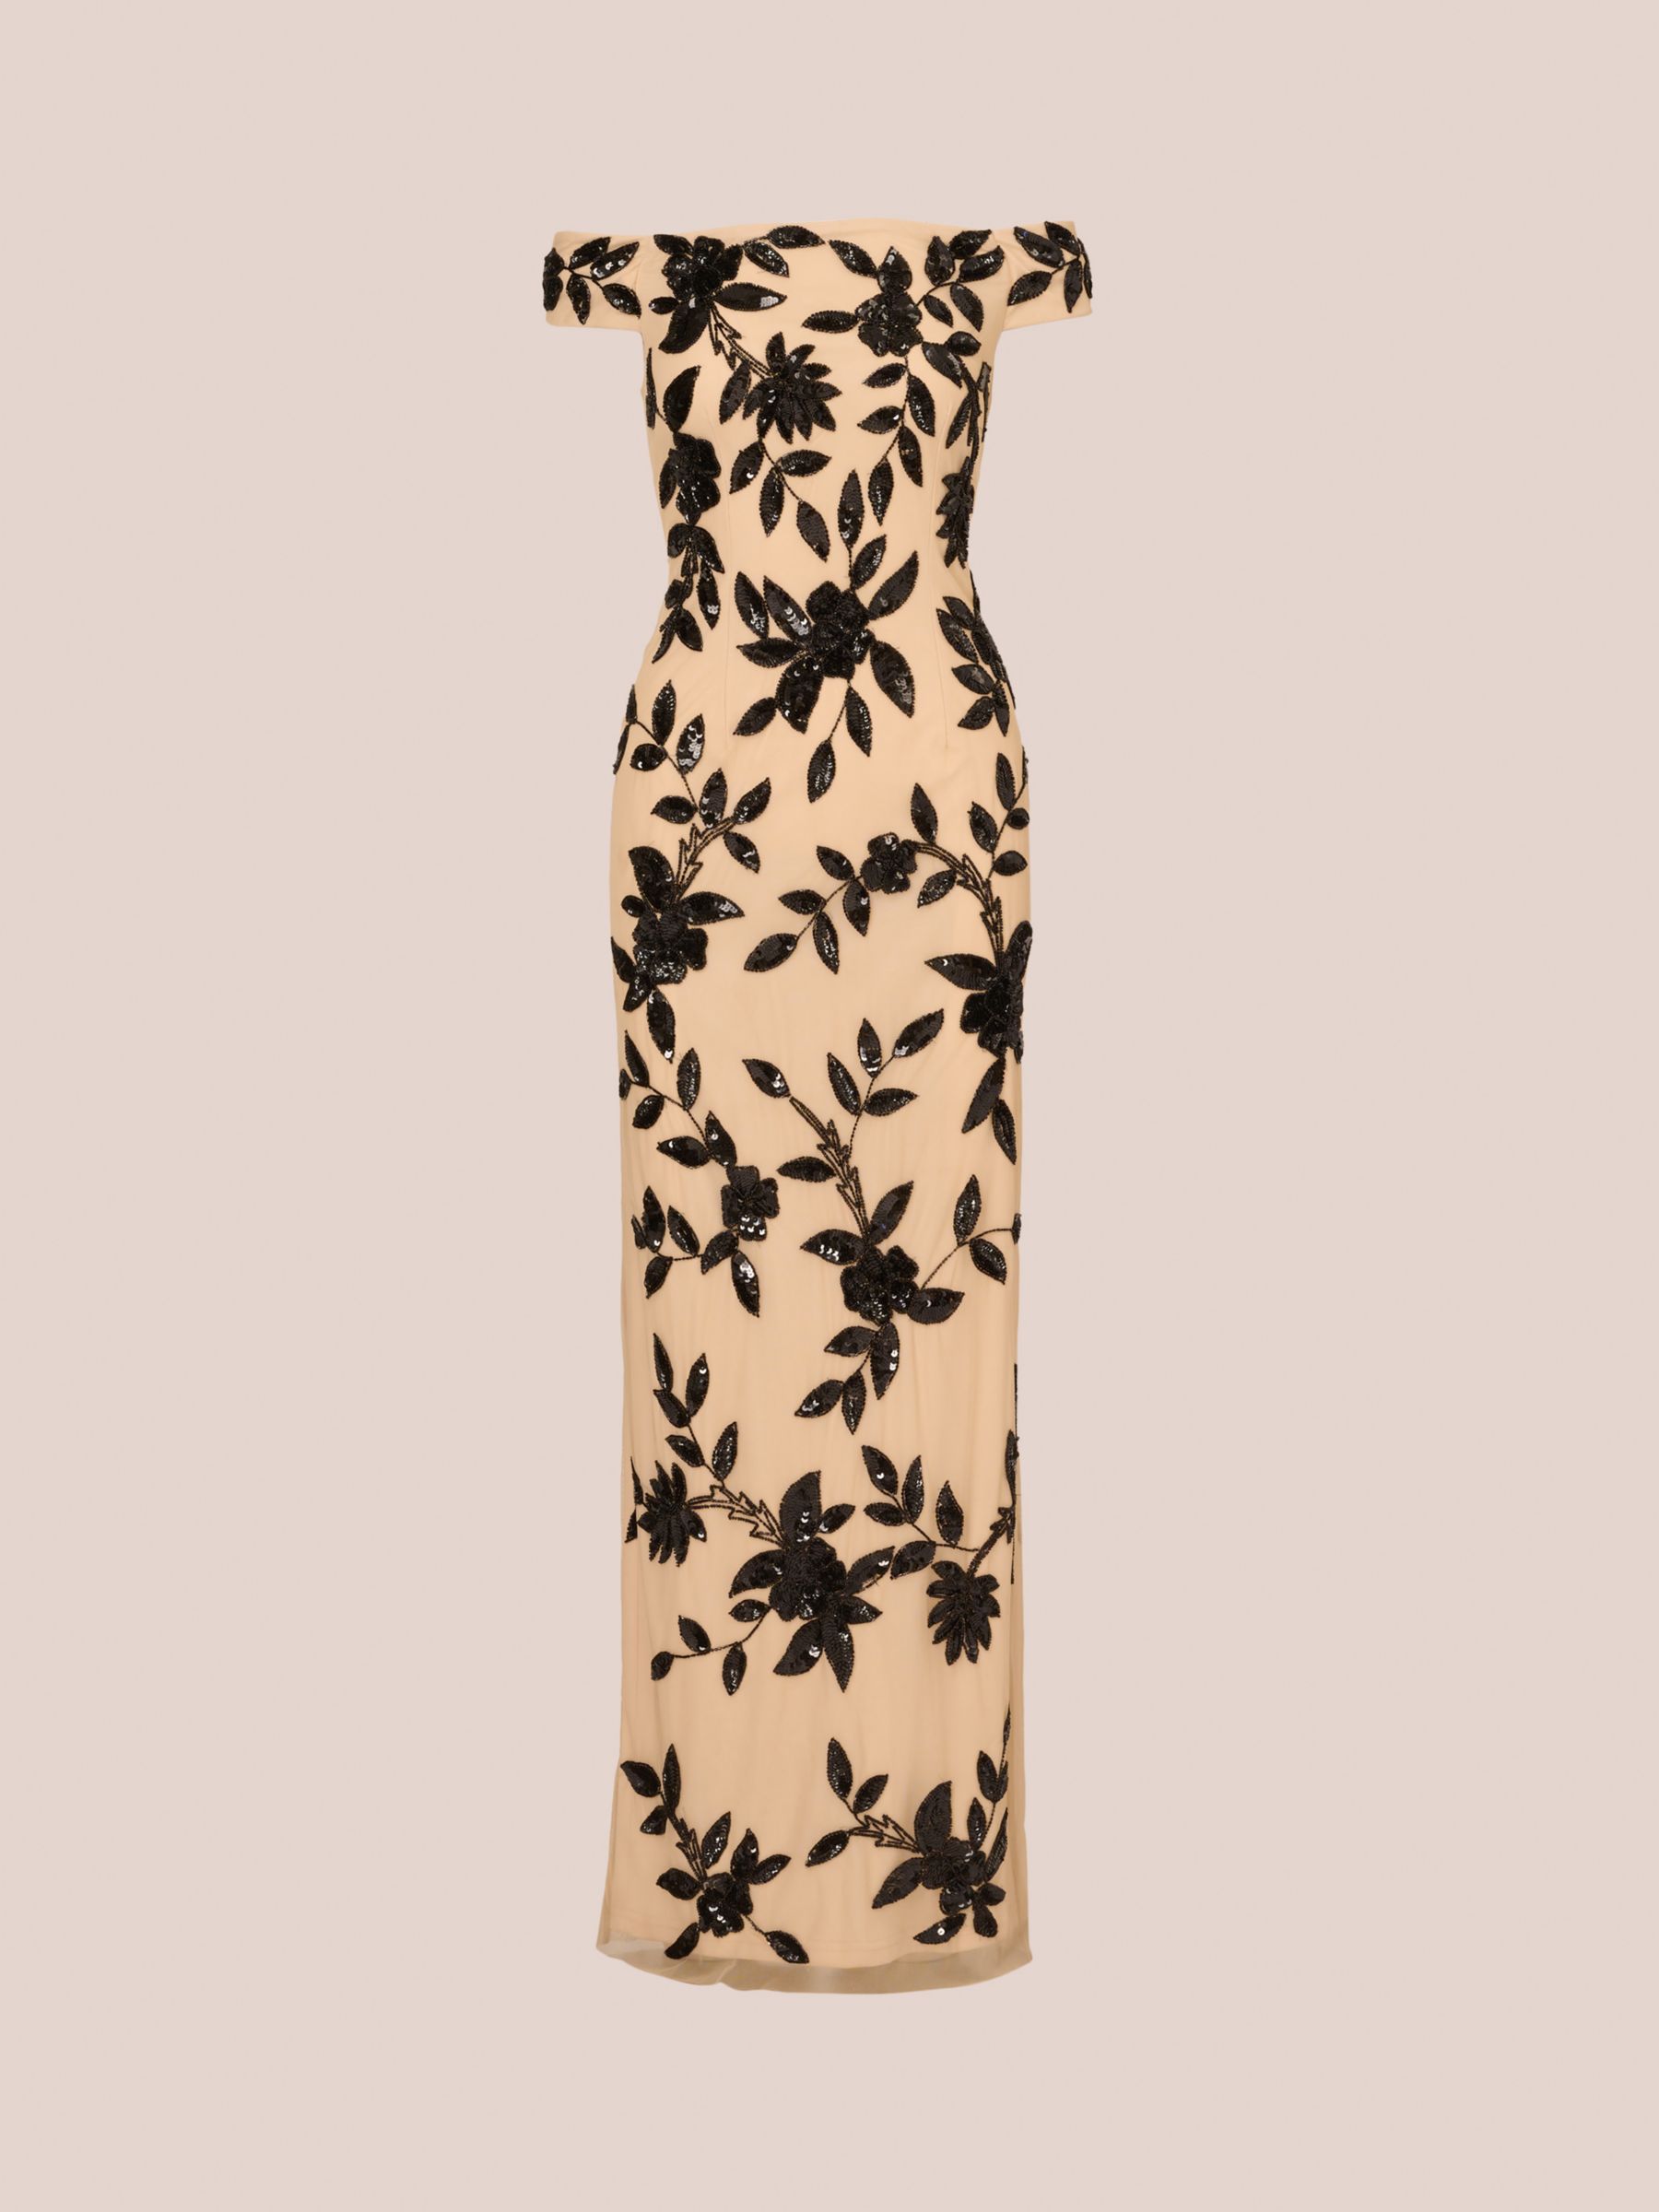 Buy Adrianna Papell Beaded Mesh Maxi Dress, Black/Nude Online at johnlewis.com